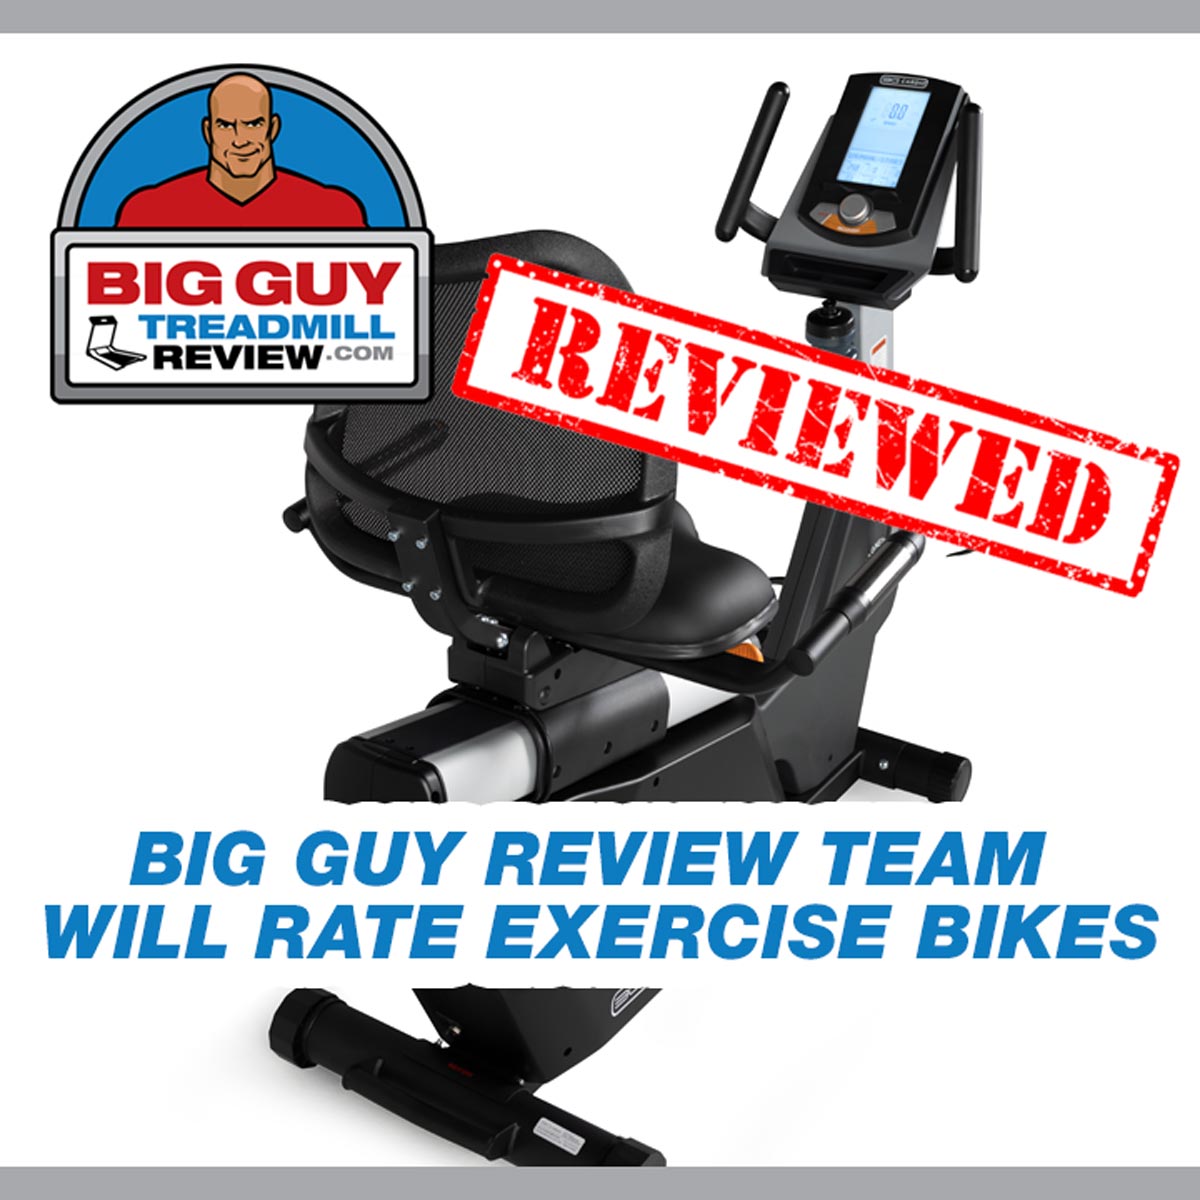 Coming attraction: Big Guy Review team will rate exercise bikes!